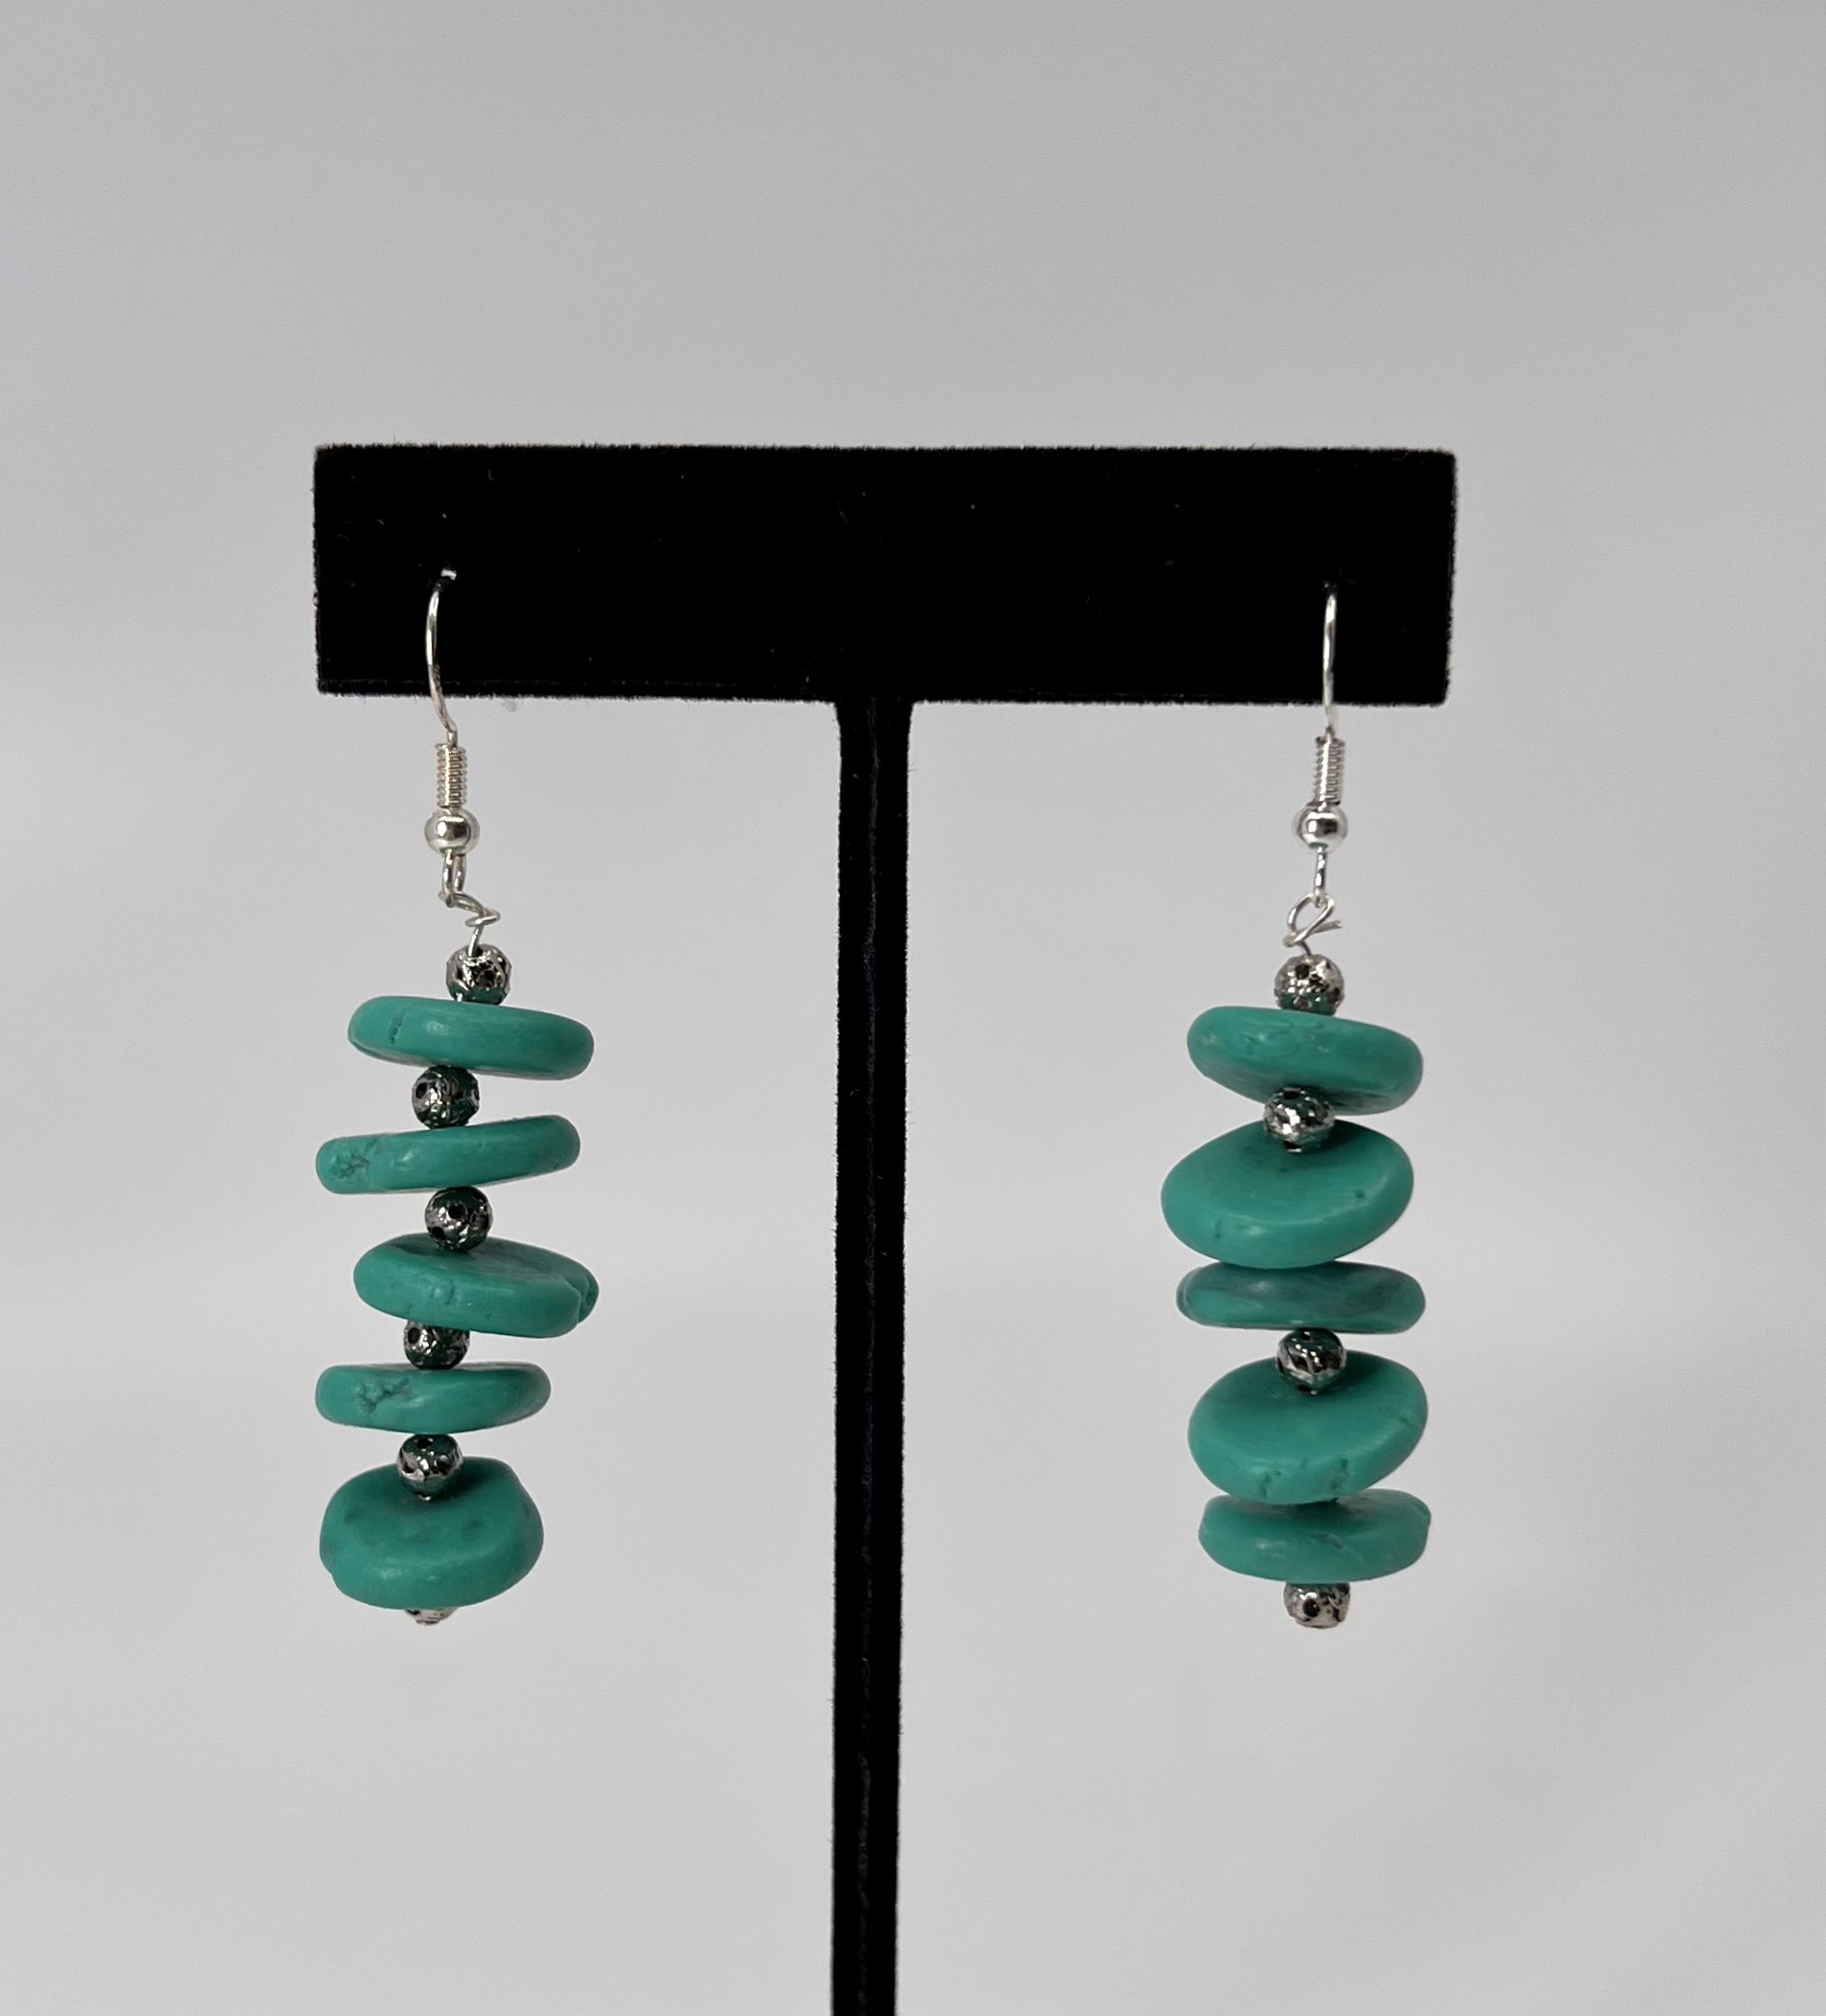 Turquoise Earrings with Filigree Silver Beads by Gina Caruso